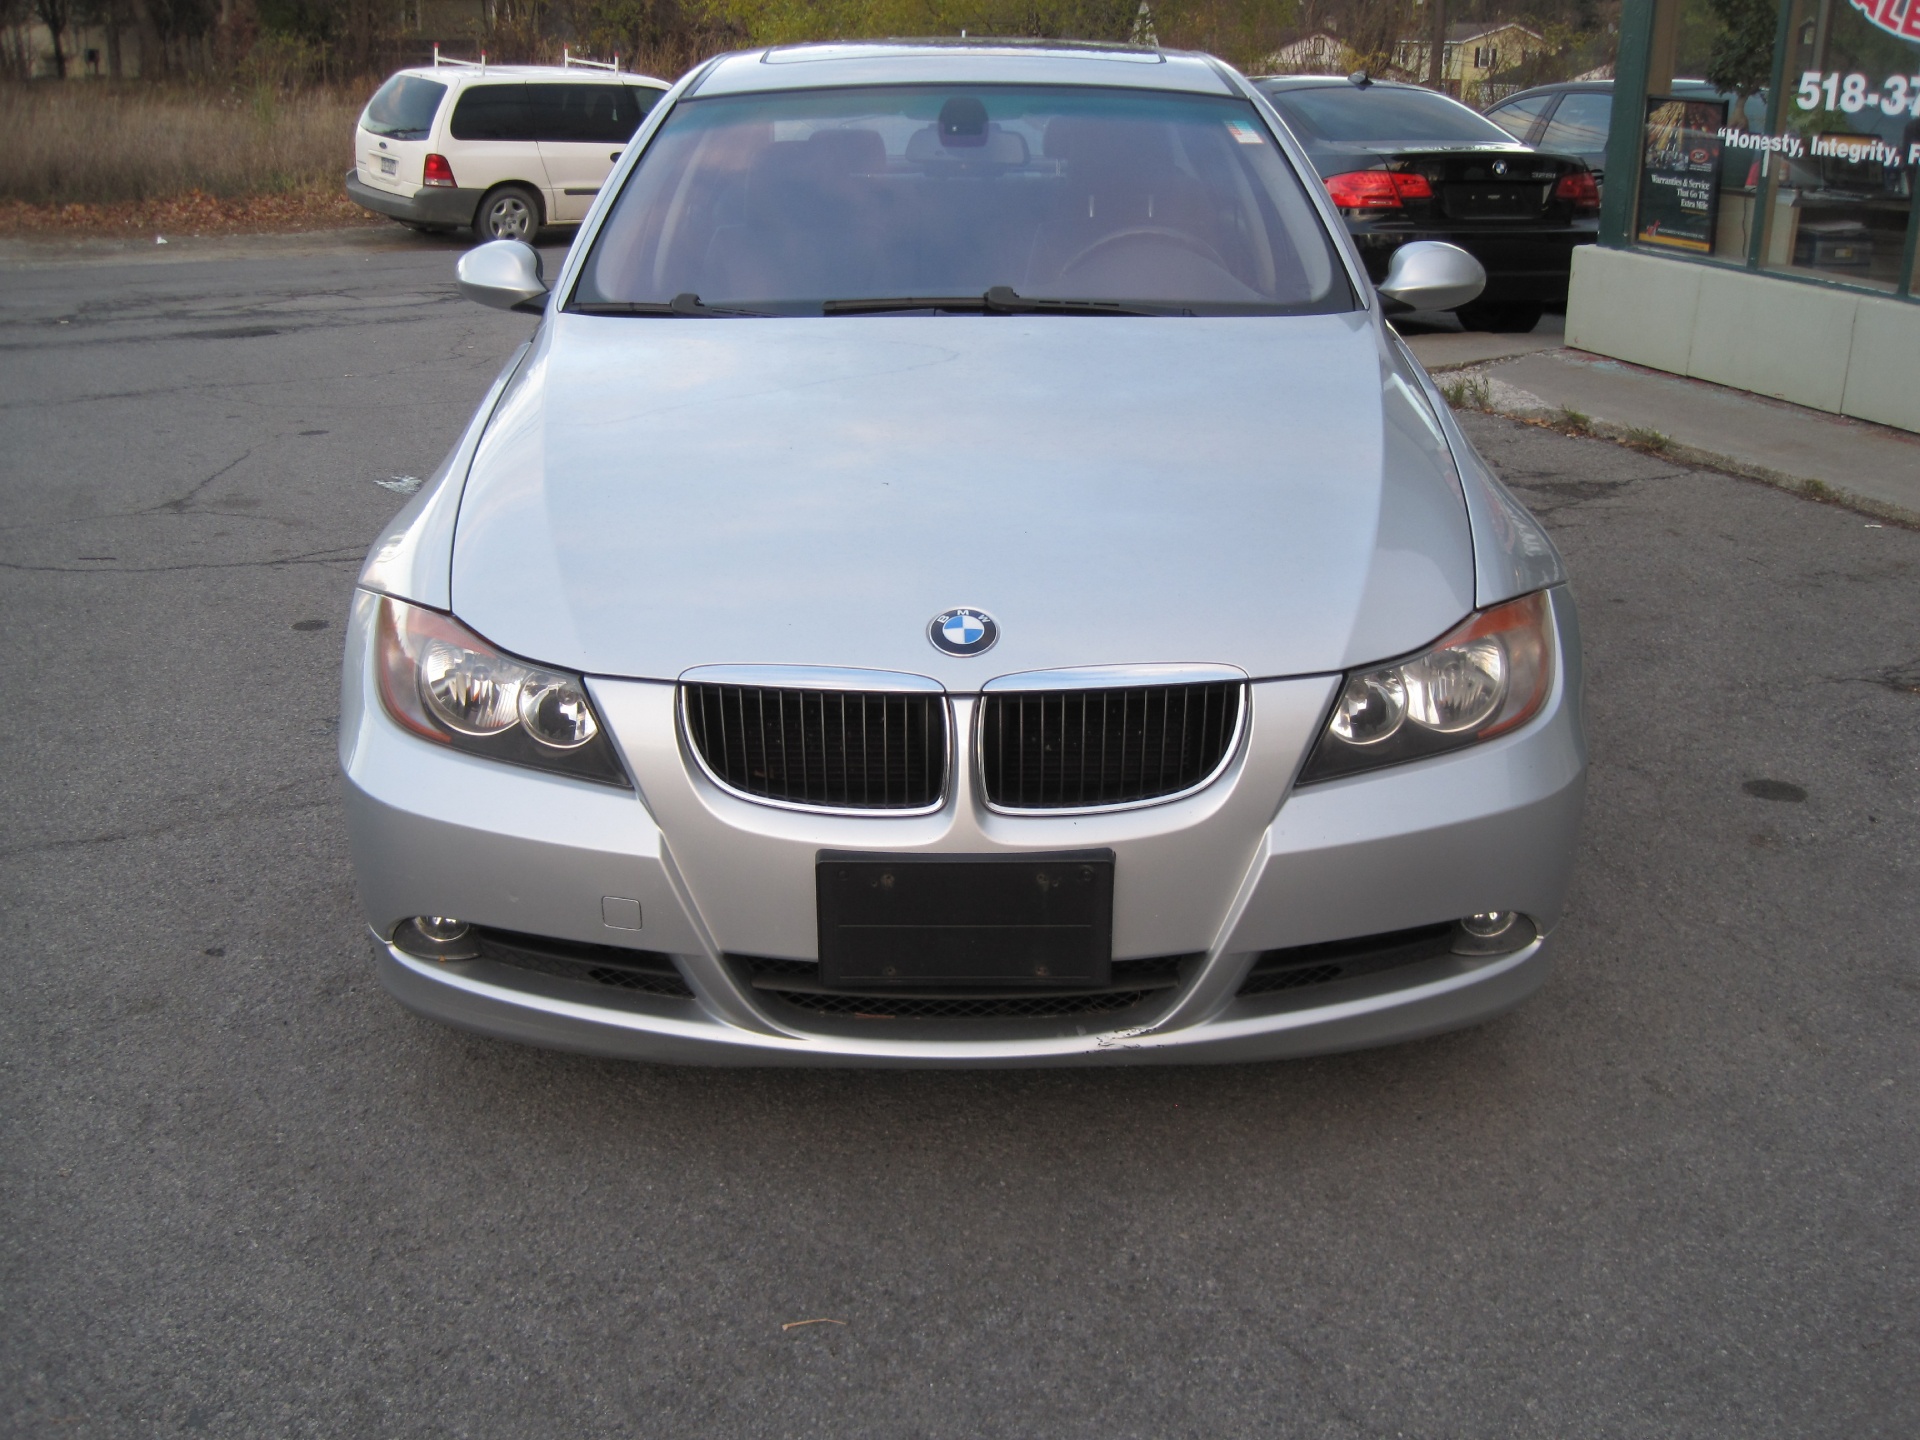 Used 2007 Titanium Silver Metallic BMW 3 Series 328i AUTOMATIC,JUST TRADED IN WITH US FOR A CONVERTIBLE | Albany, NY